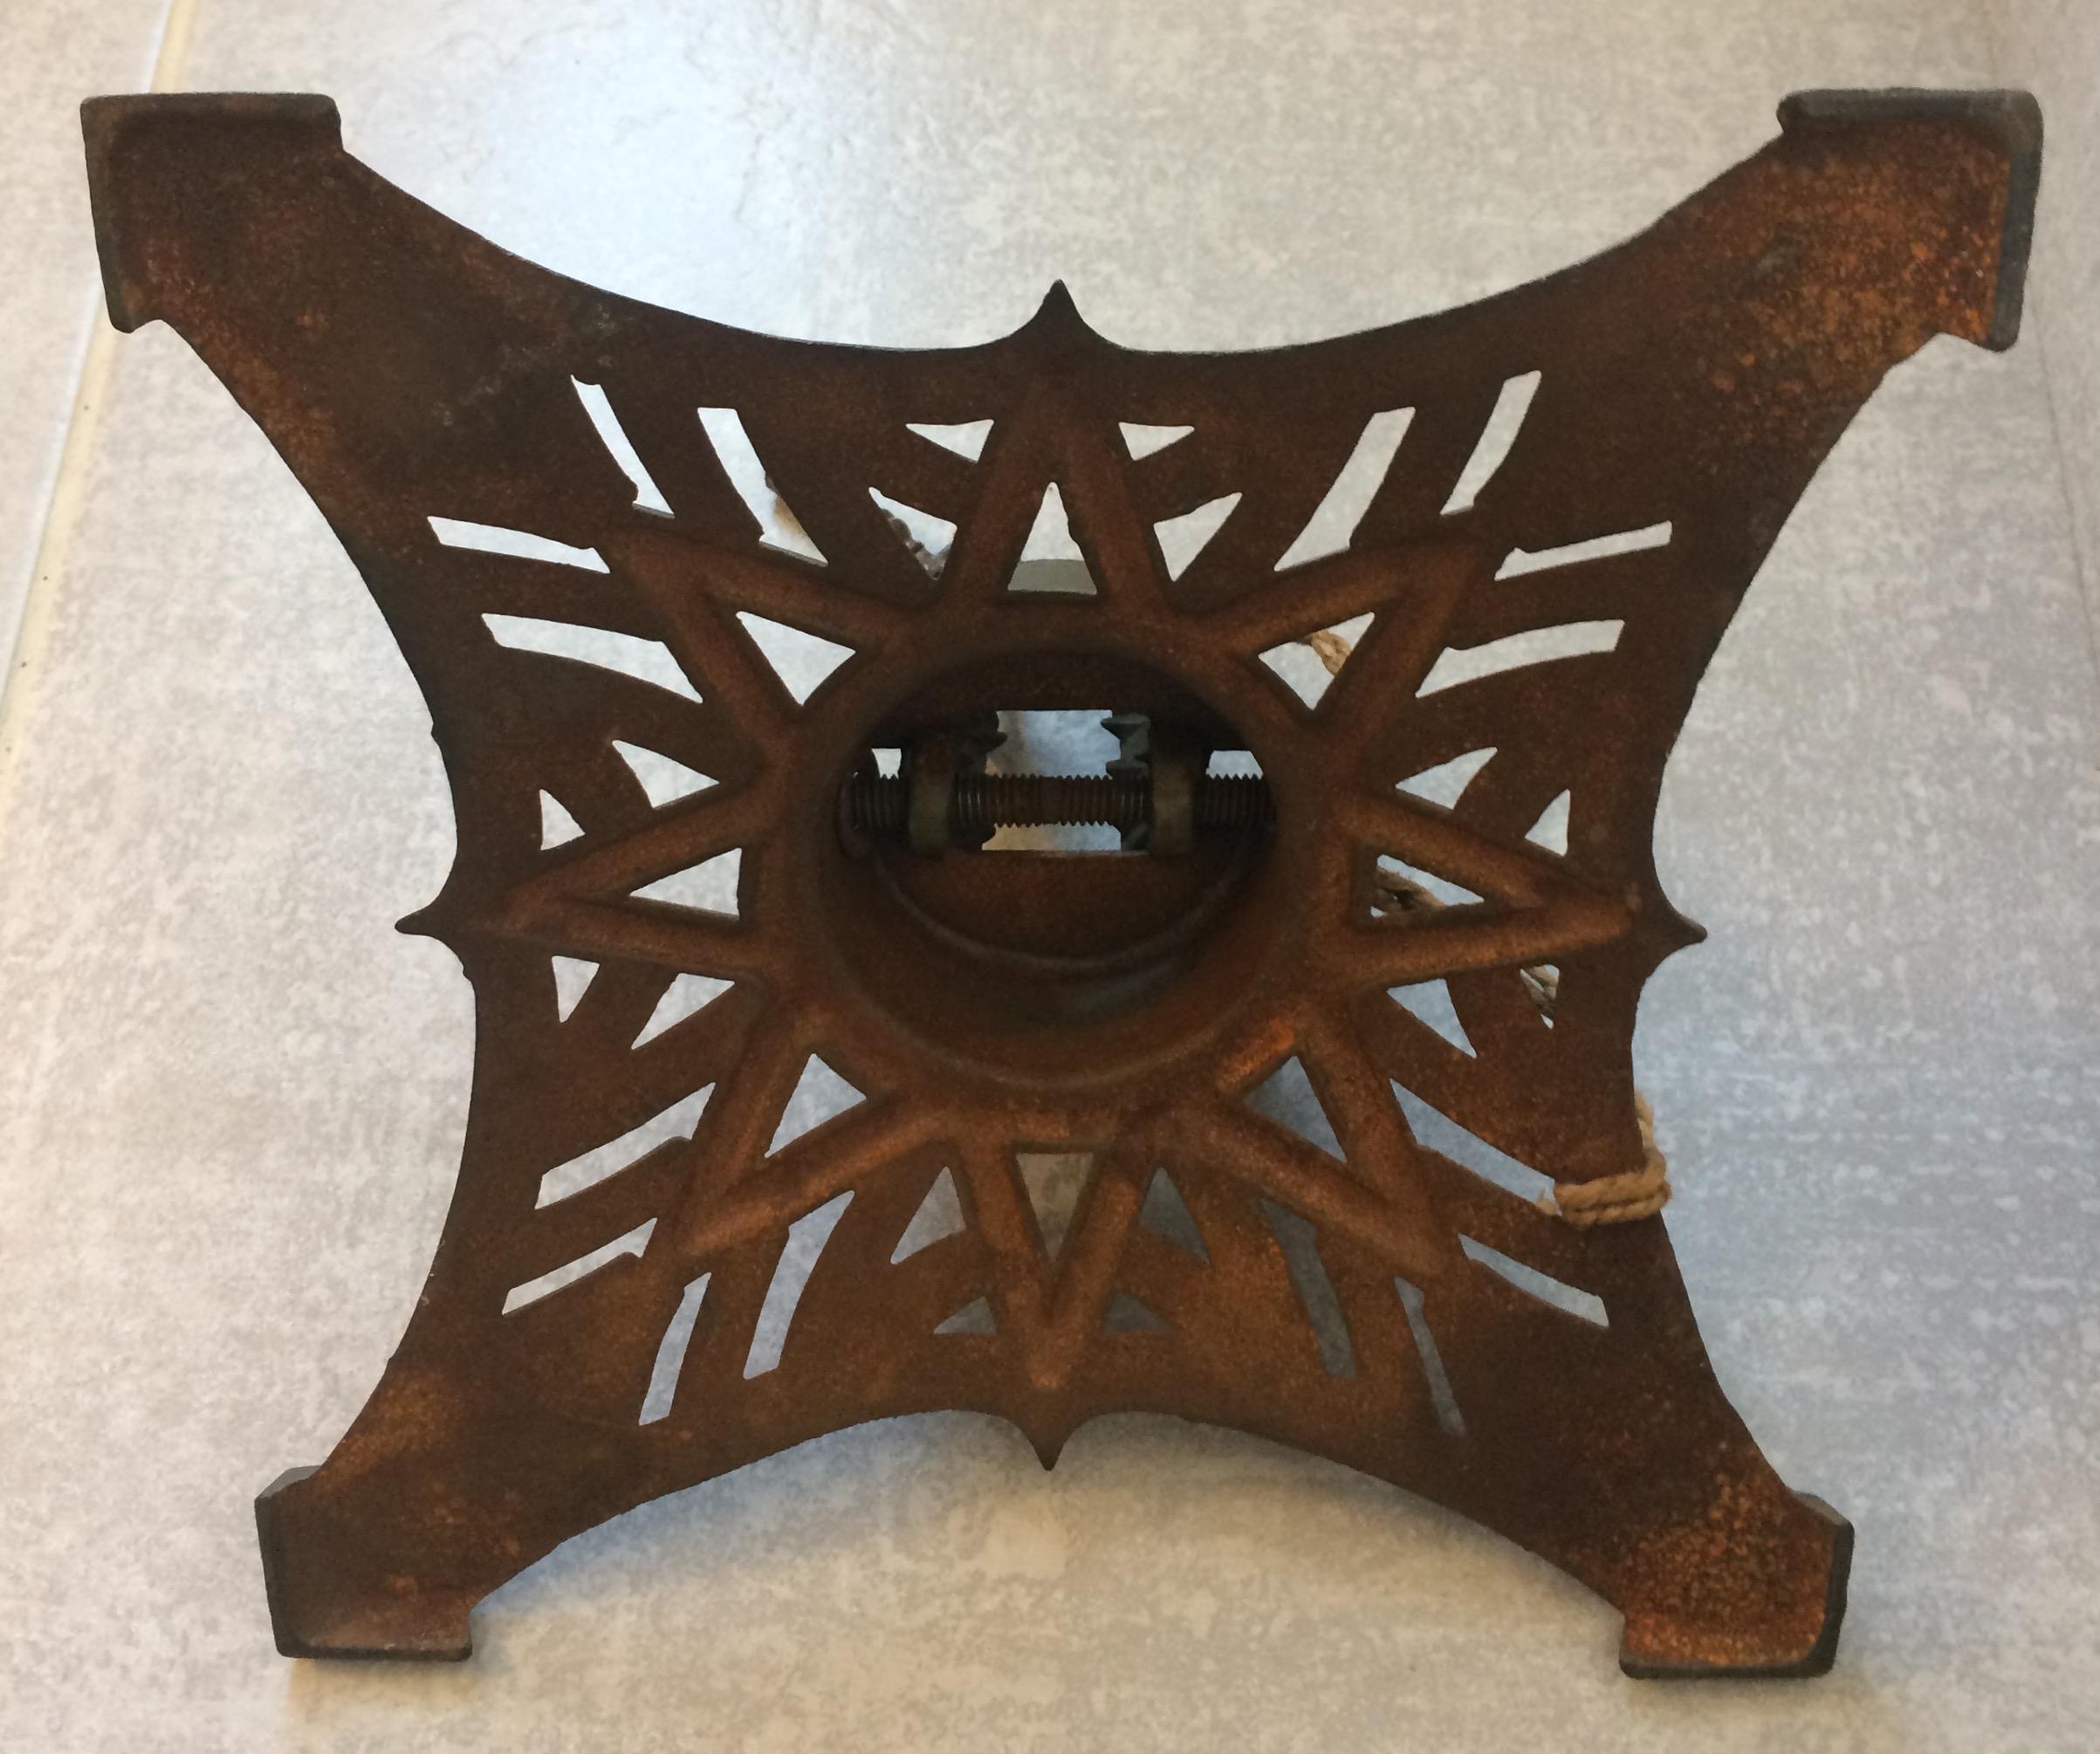 A fine French Art Deco Christmas tree stand. 
This early 20th century, cast iron stand is especially crafted for small Christmas trees. It is perfectly Art Deco in shape and style. Ideal for displaying a Christmas tree in a shop window, on a table